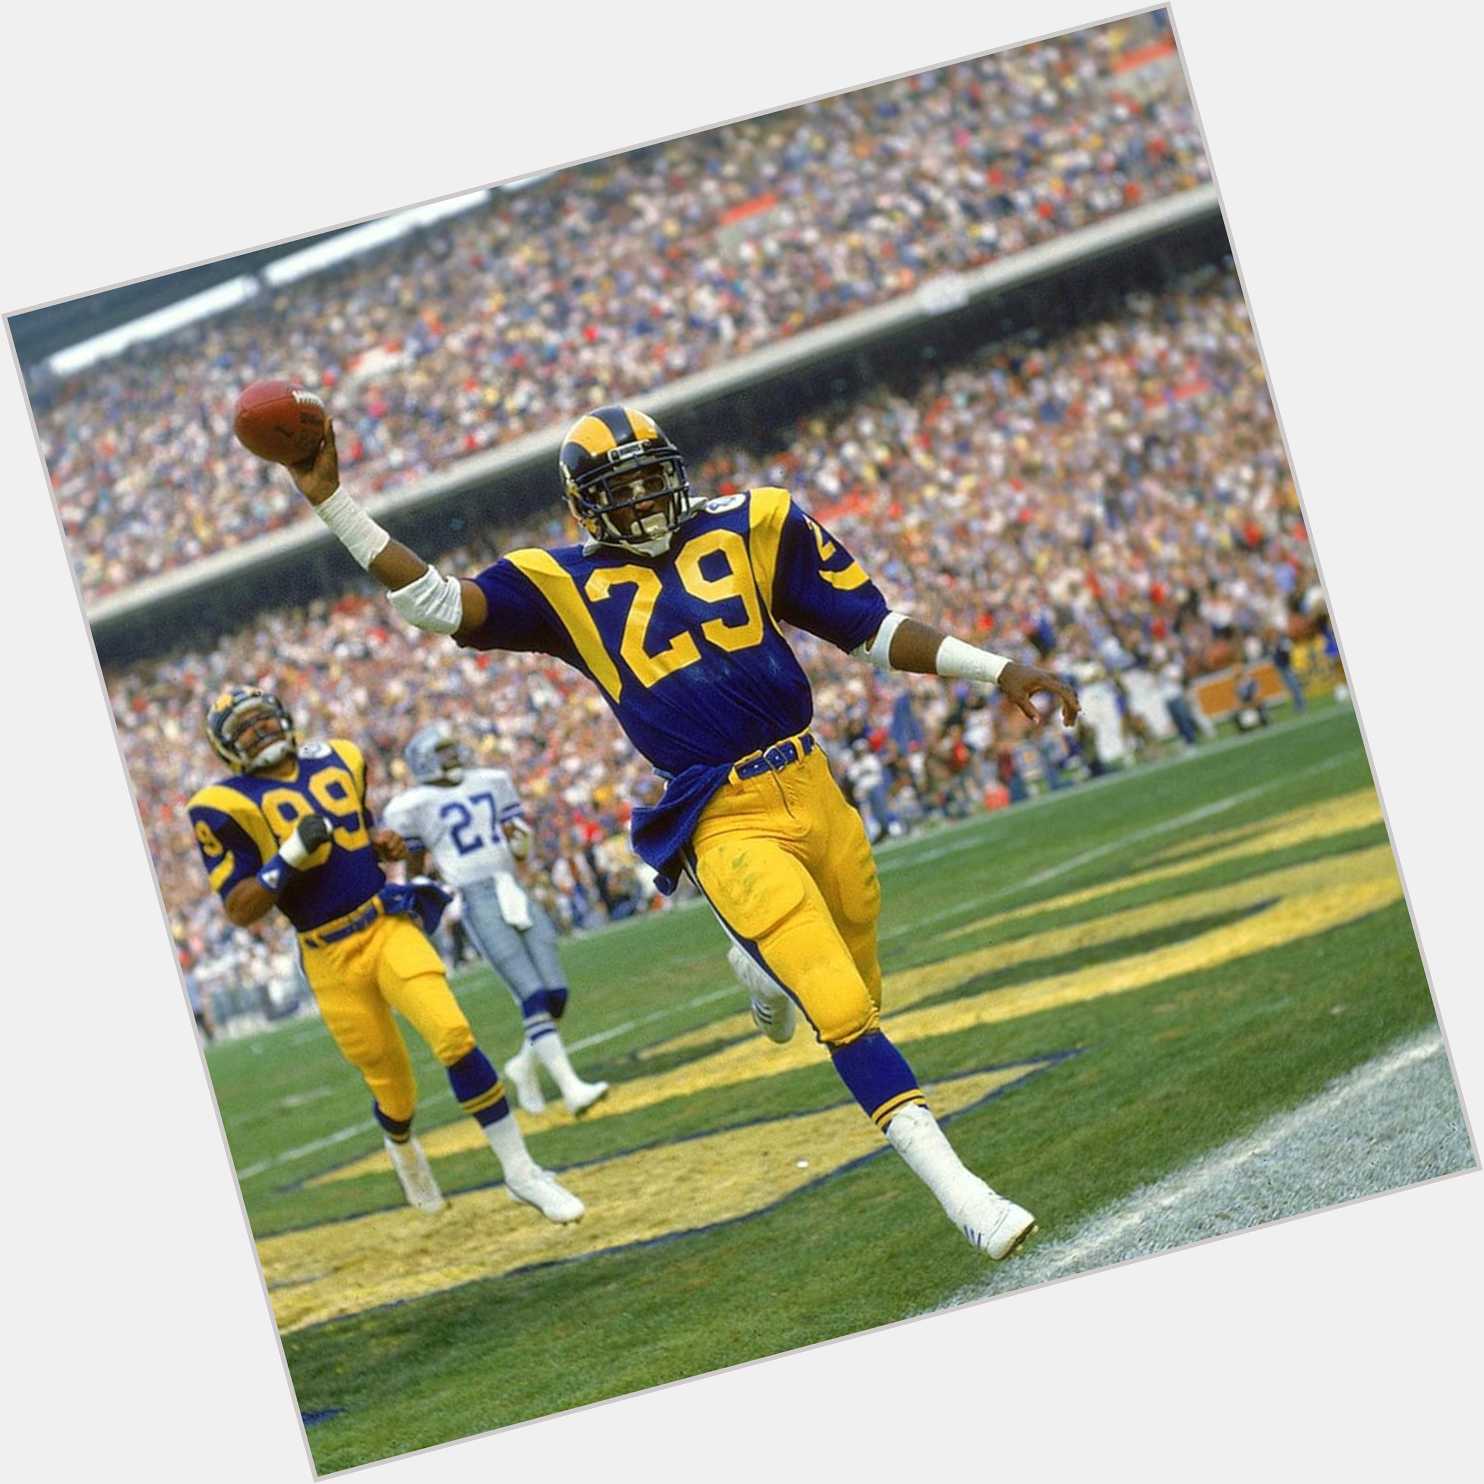   Happy Birthday to the great Eric Dickerson. HOF, MVP, I wish you the best!      